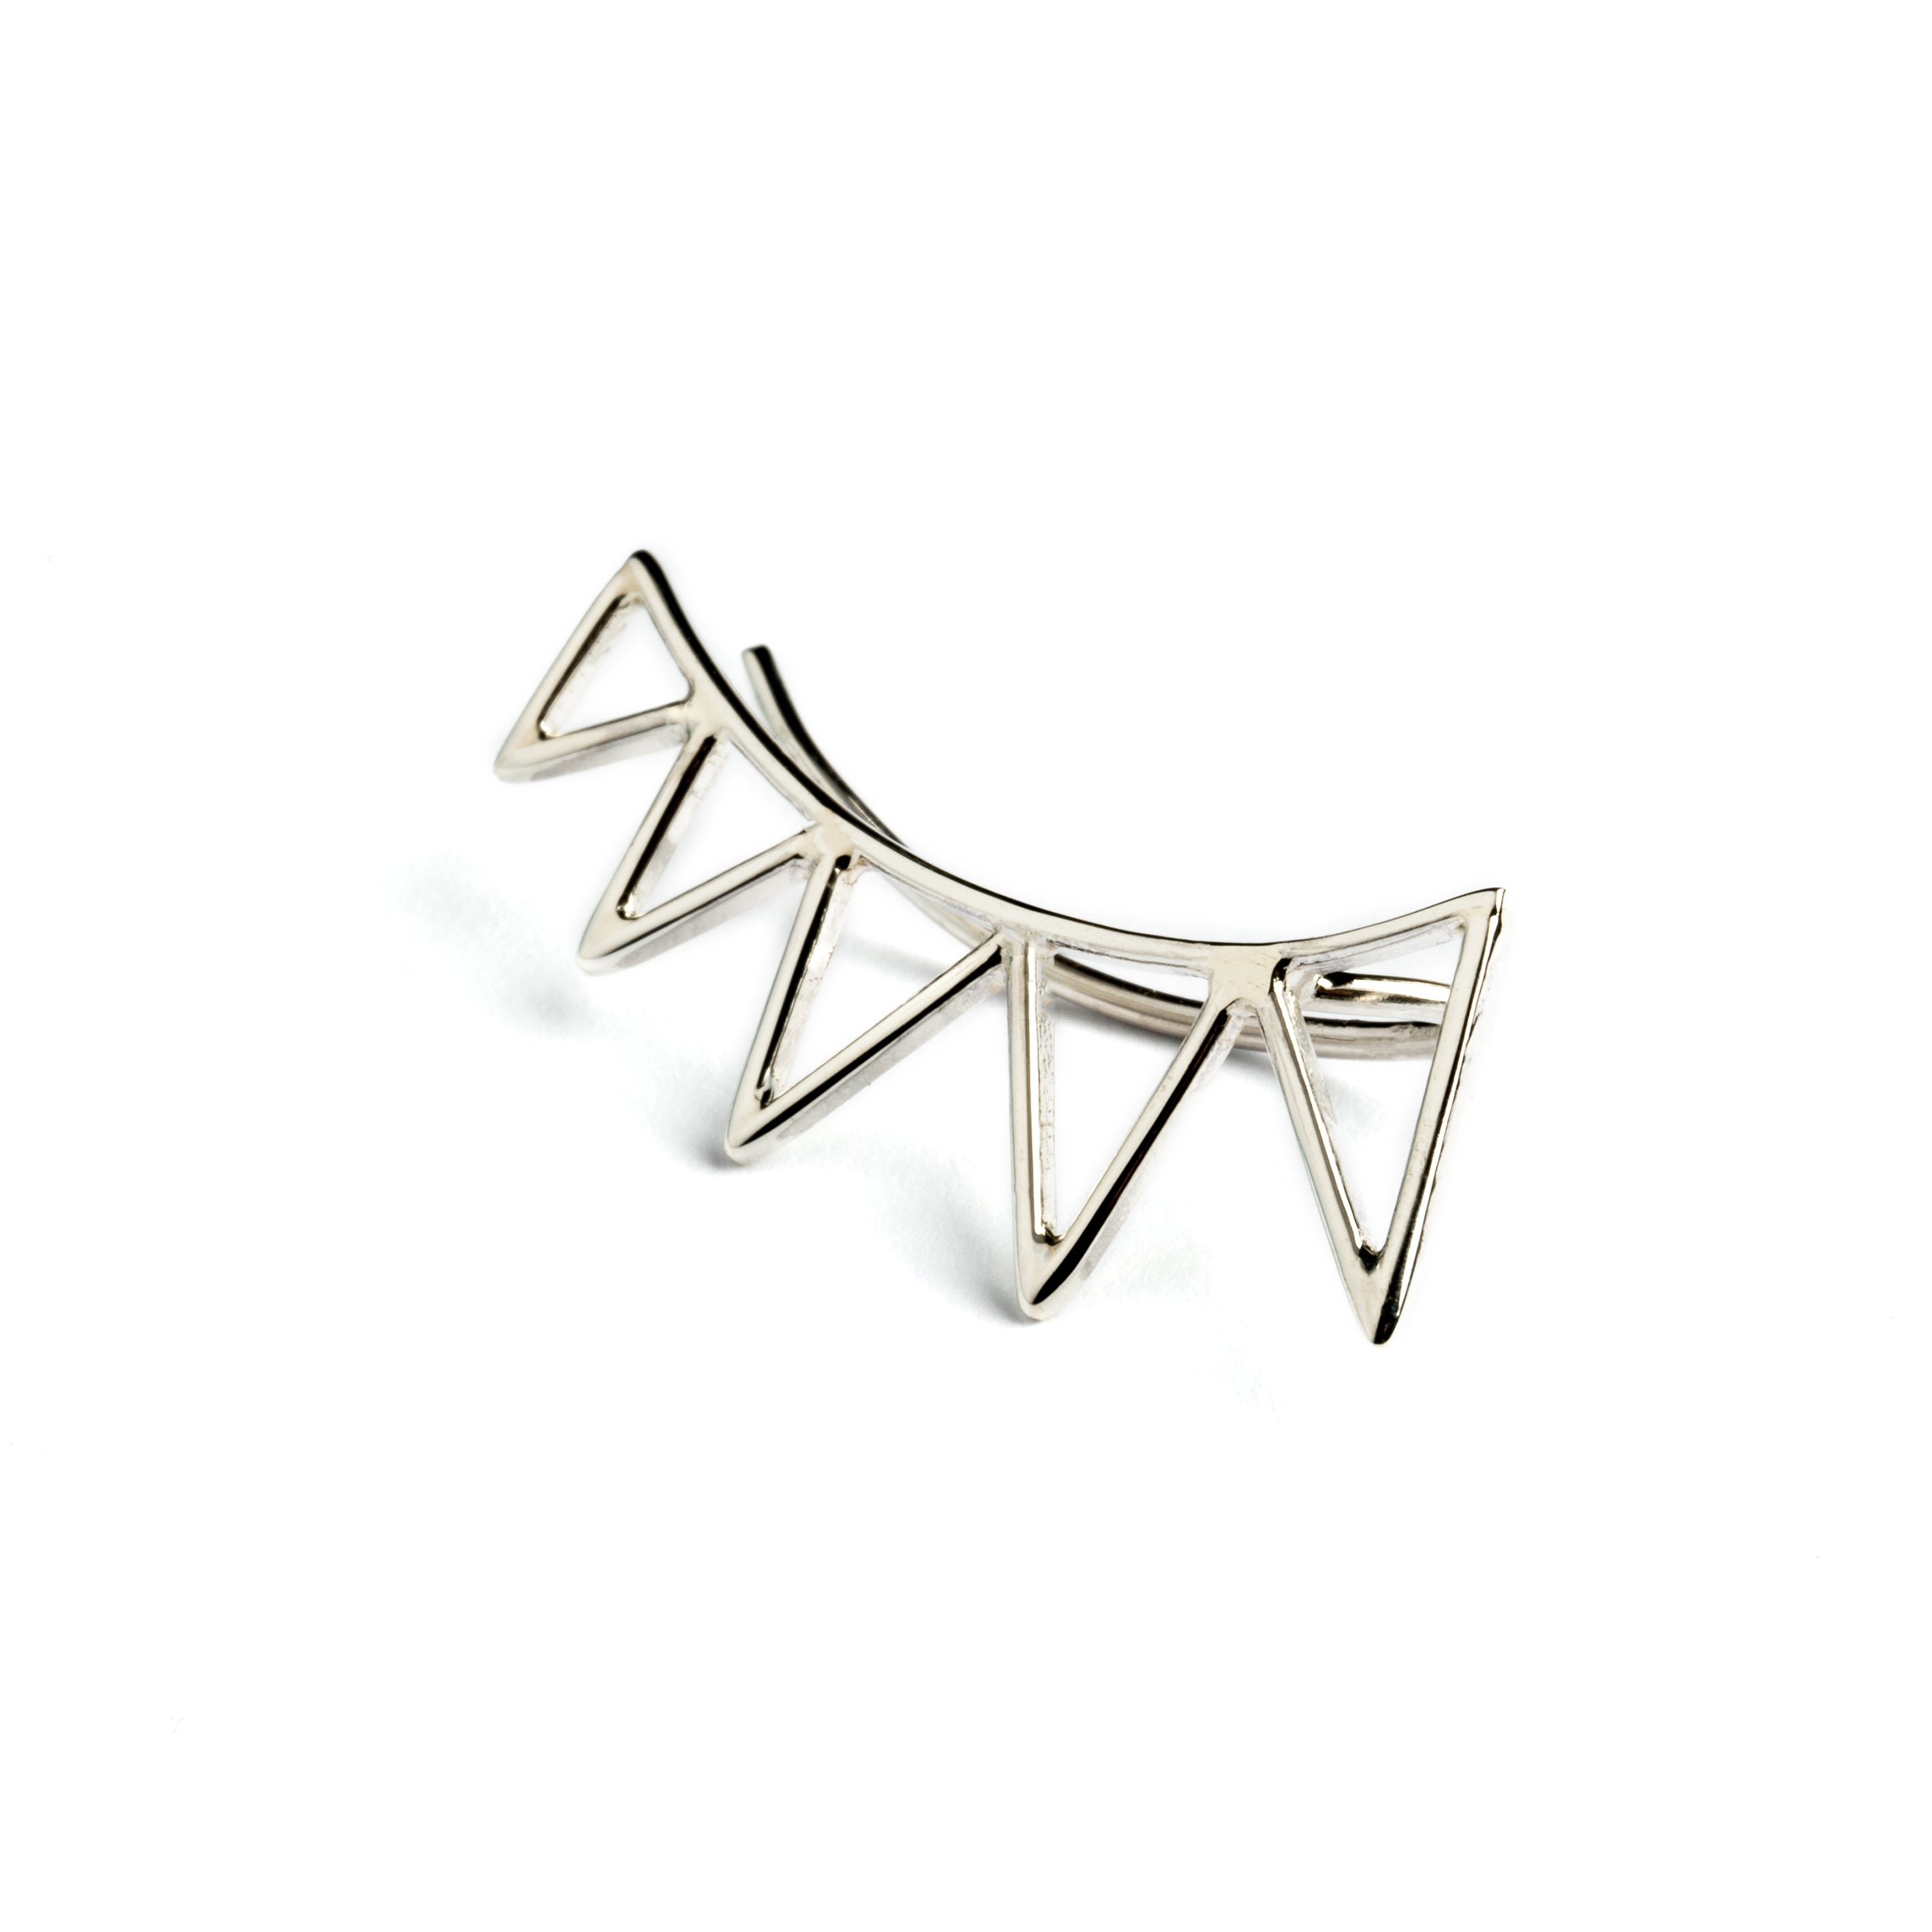 single sterling silver triangle ear climber right side view